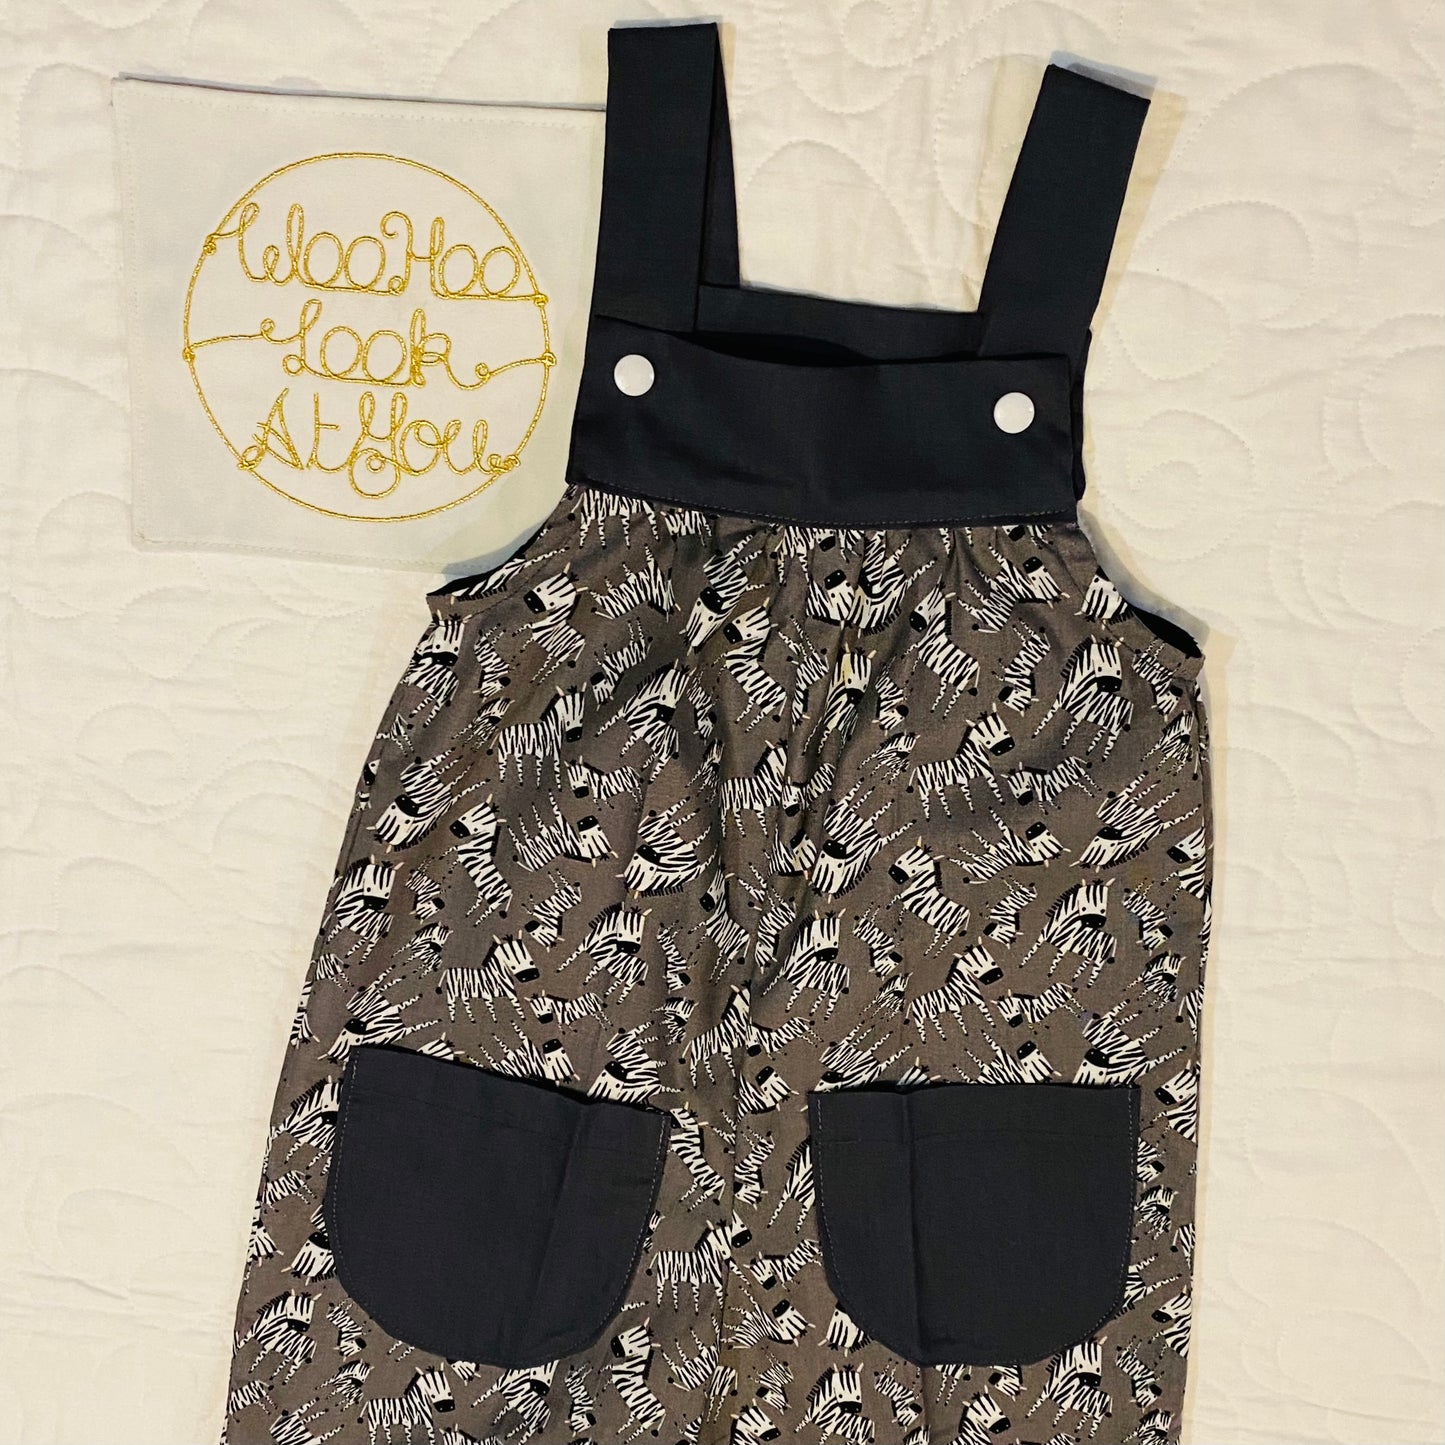 Overalls - Cute Zebras and a Pockets for Rocks